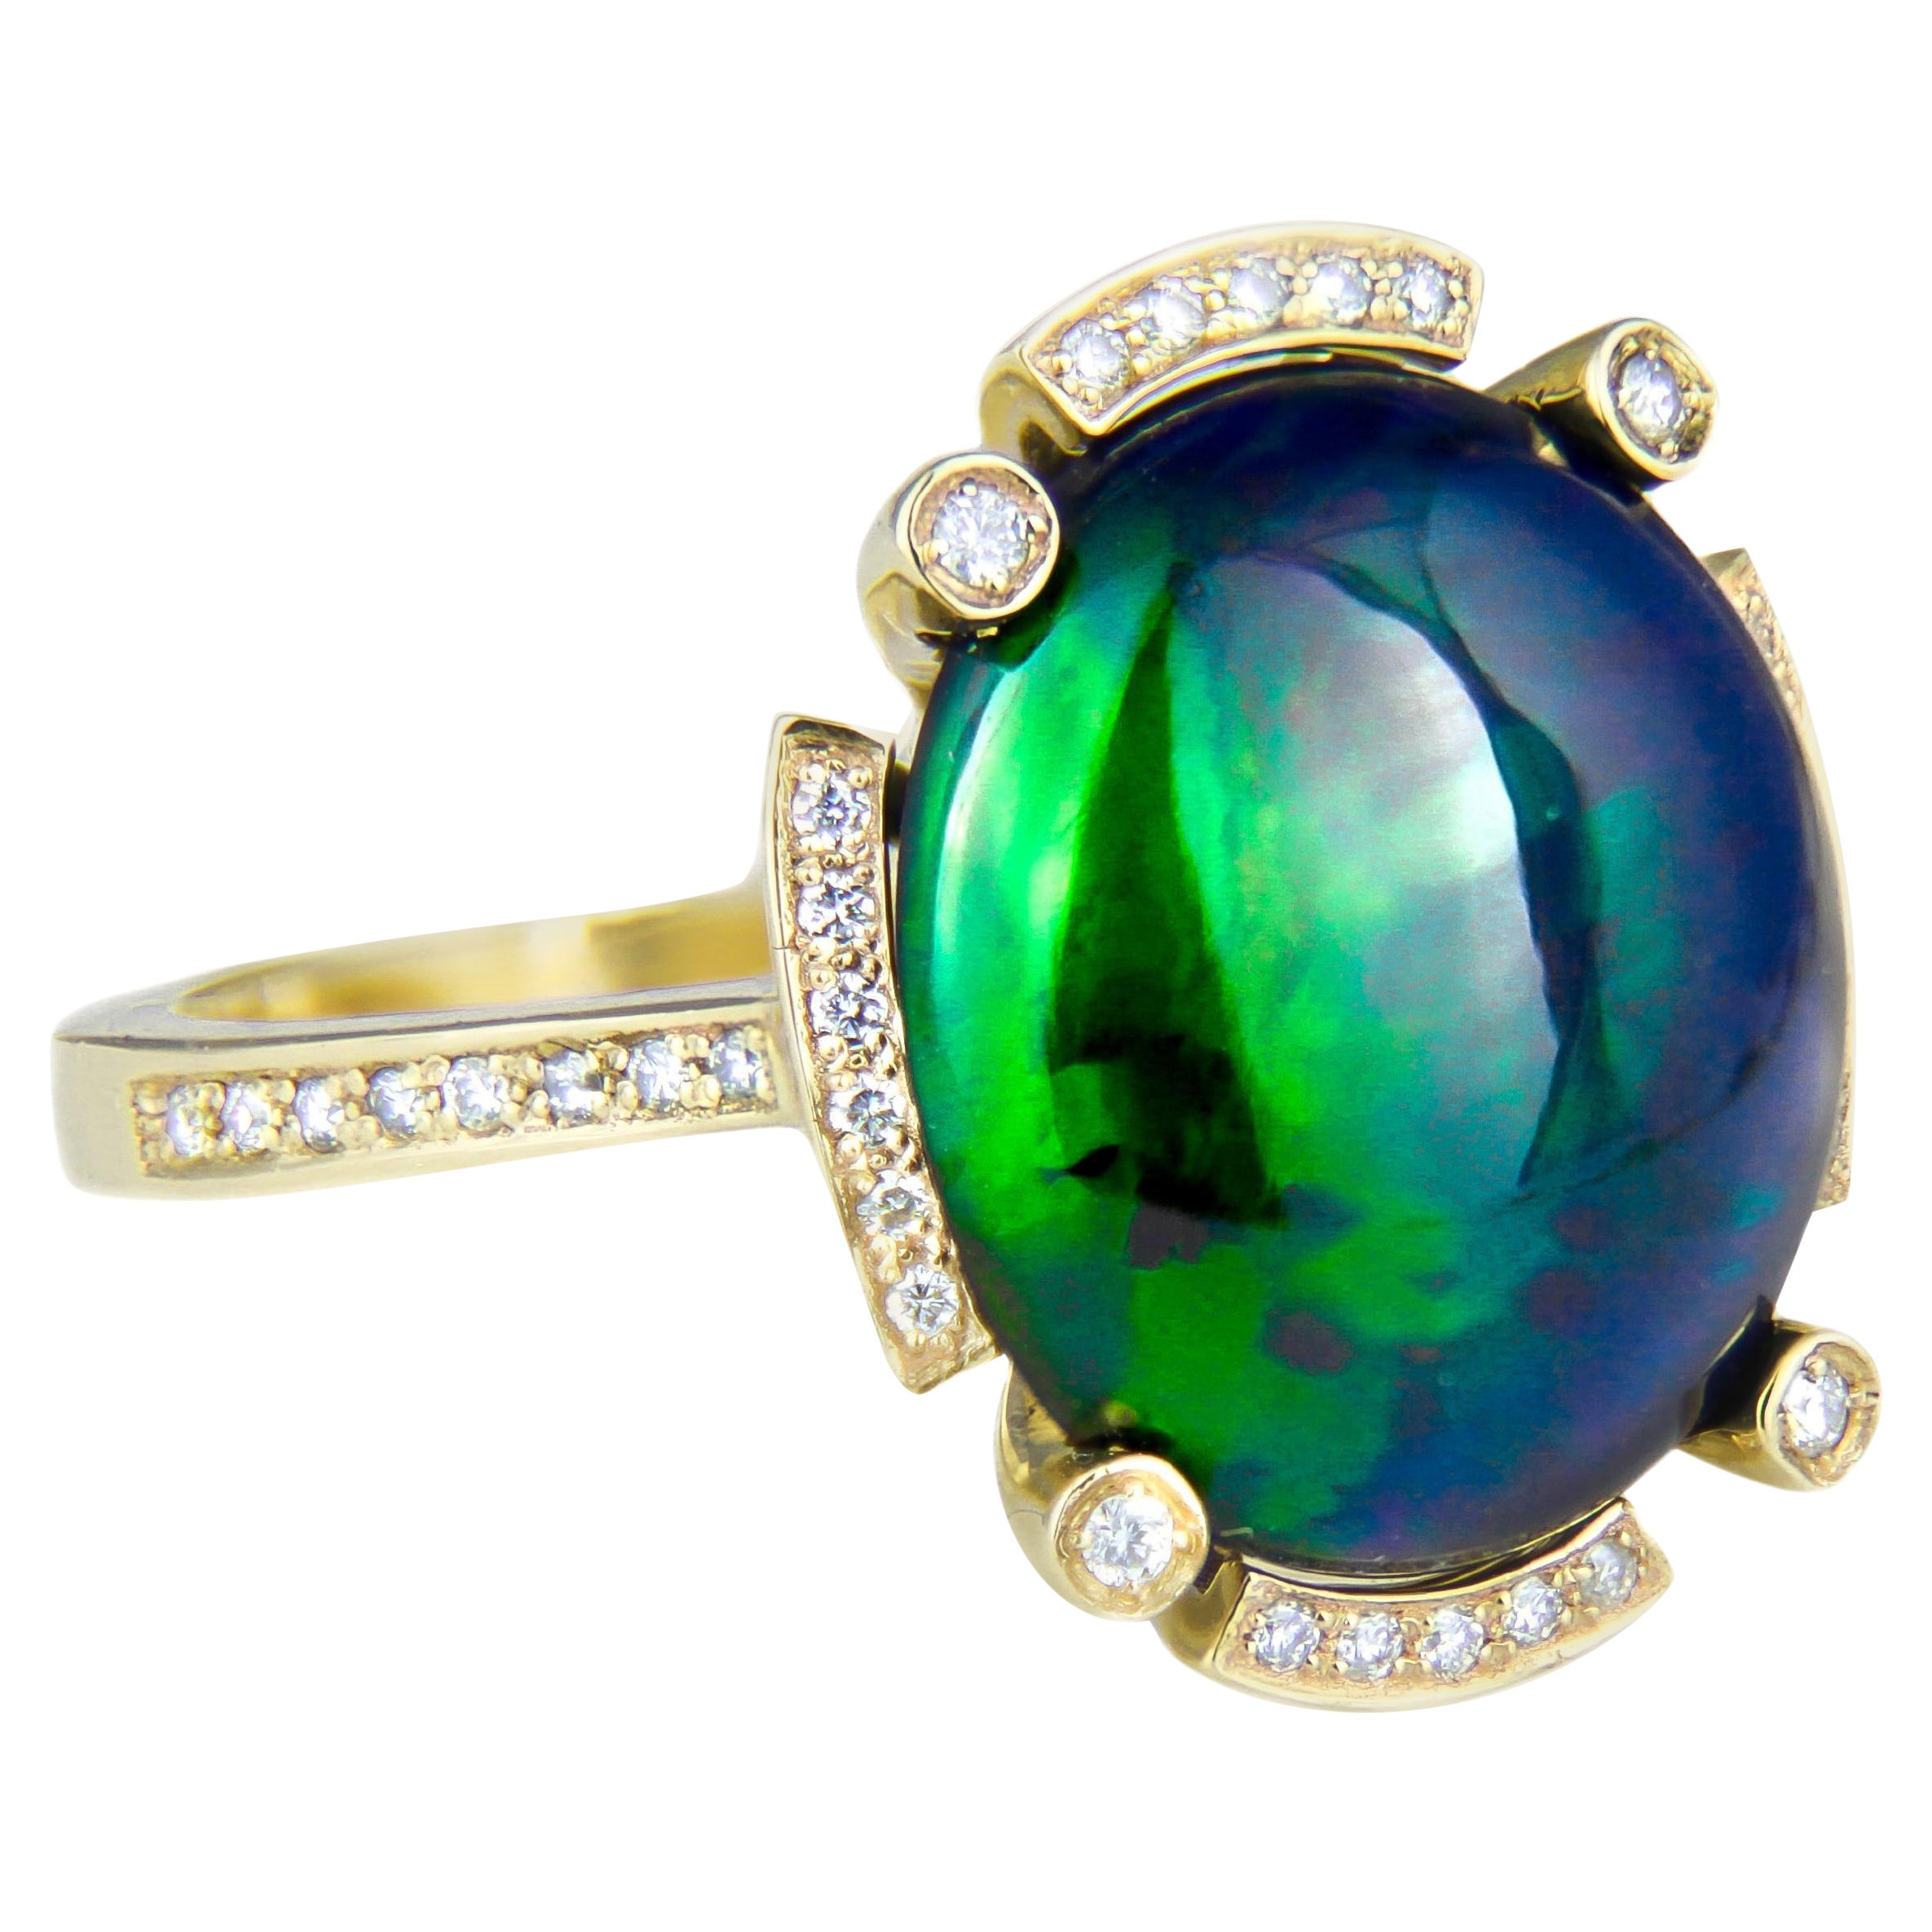 Black Opal and Diamonds Ring in 14k Gold. Gold Ring with Opal !